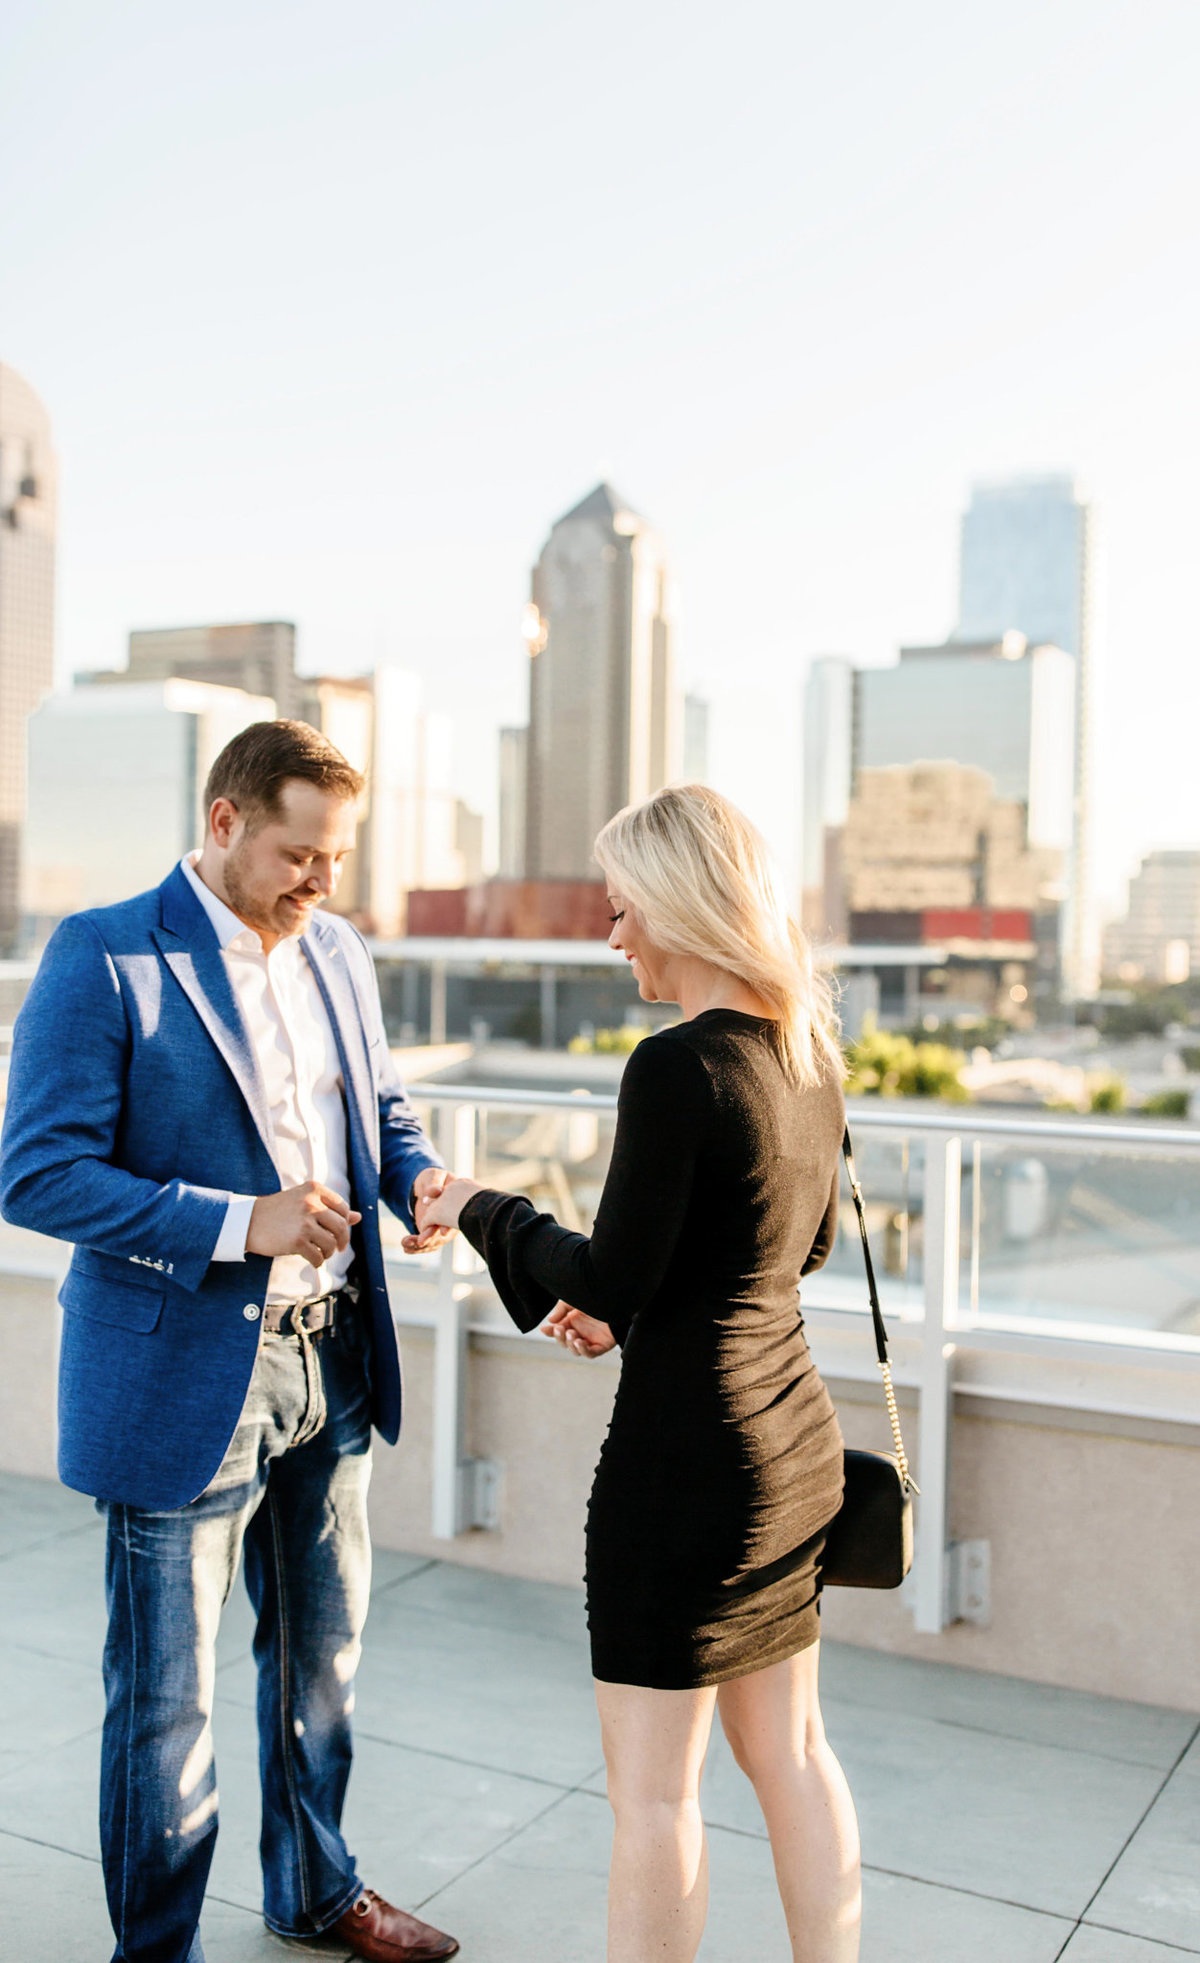 Eric & Megan - Downtown Dallas Rooftop Proposal & Engagement Session-18